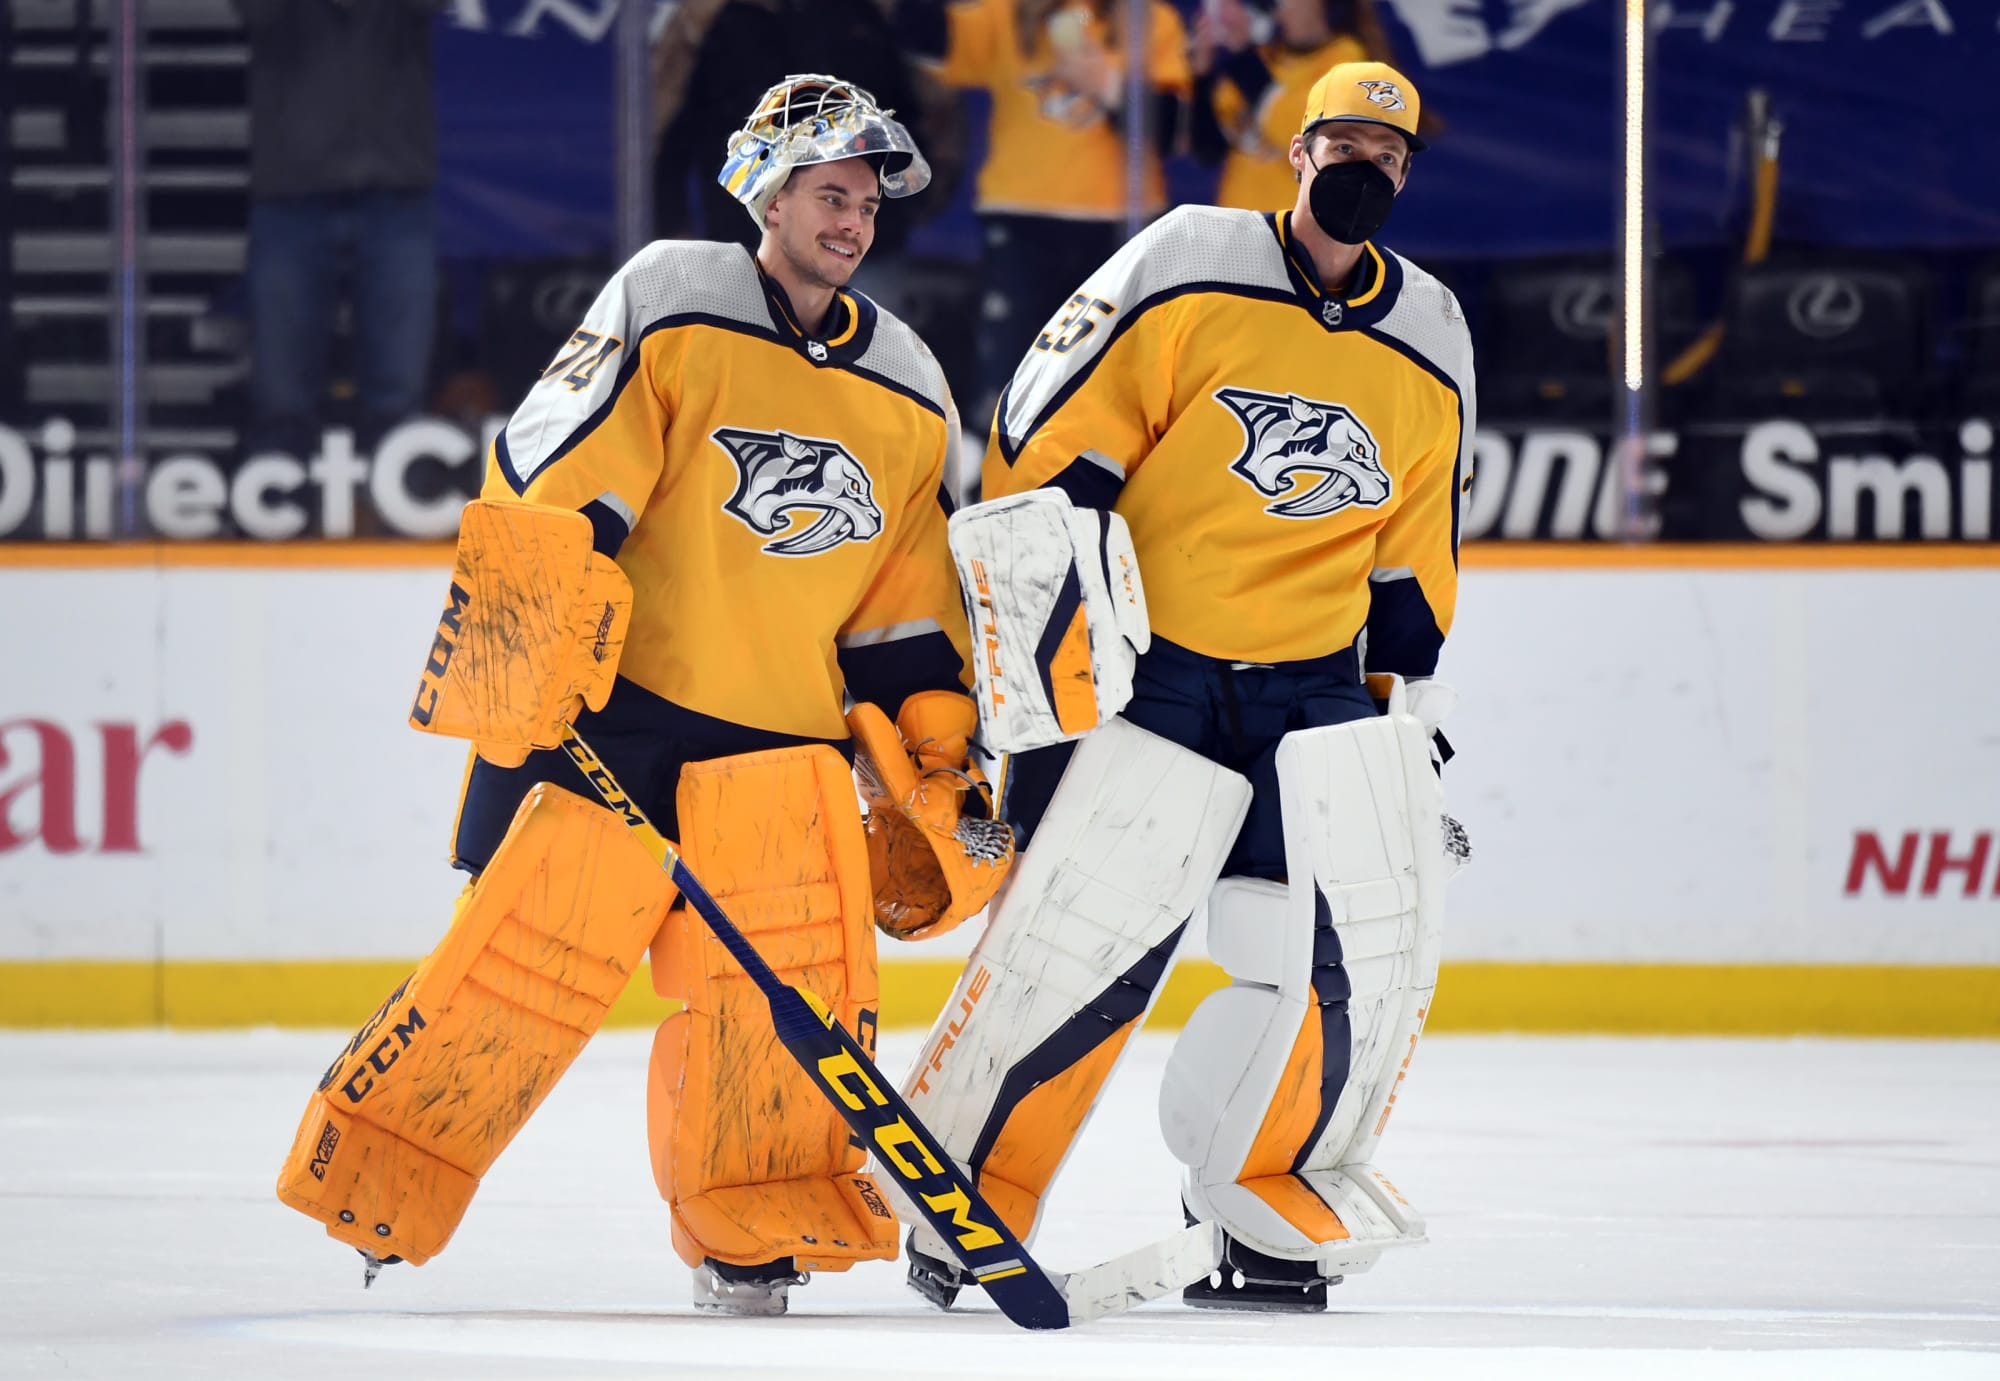 Preds Name Final Roster, Want Others to Be Ready for NHL Opportunities